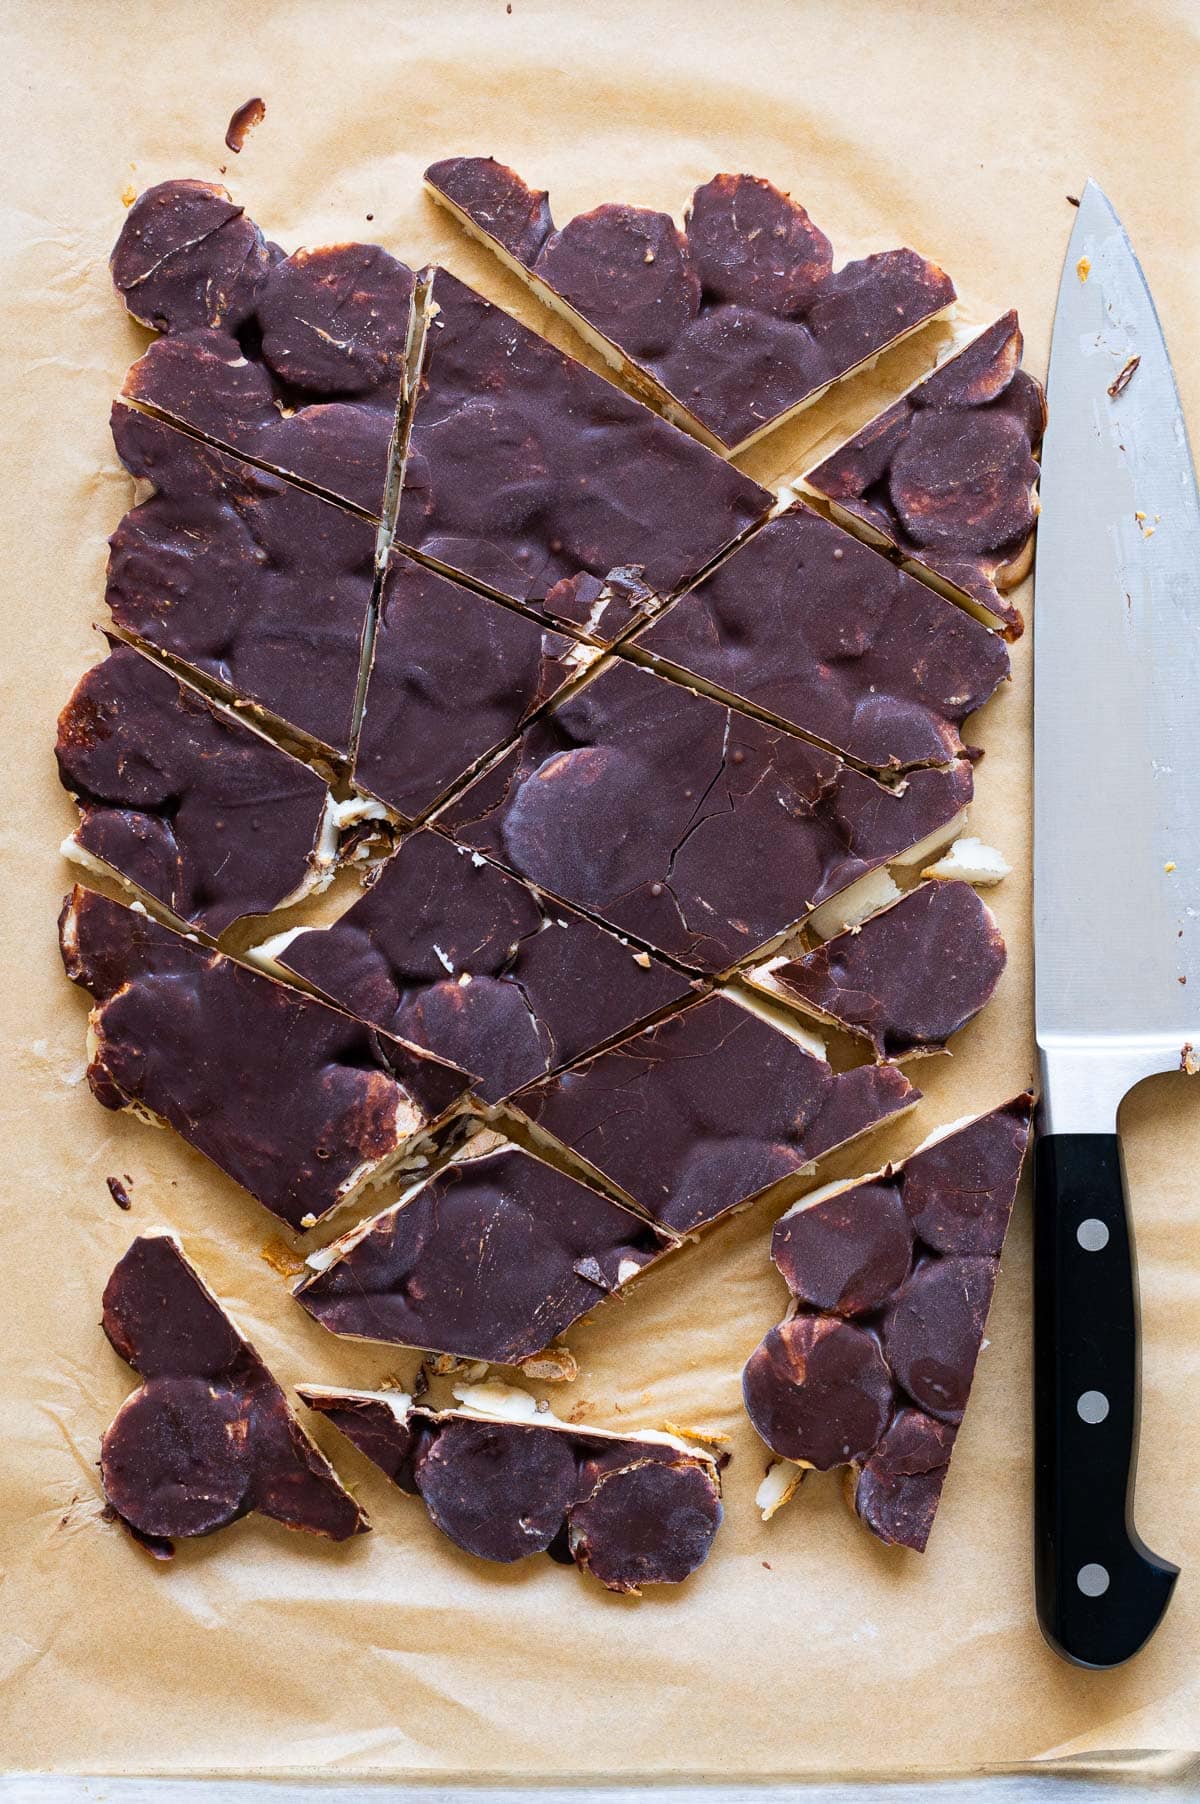 Sliced banana peanut butter bark on parchment paper with knife next to it.